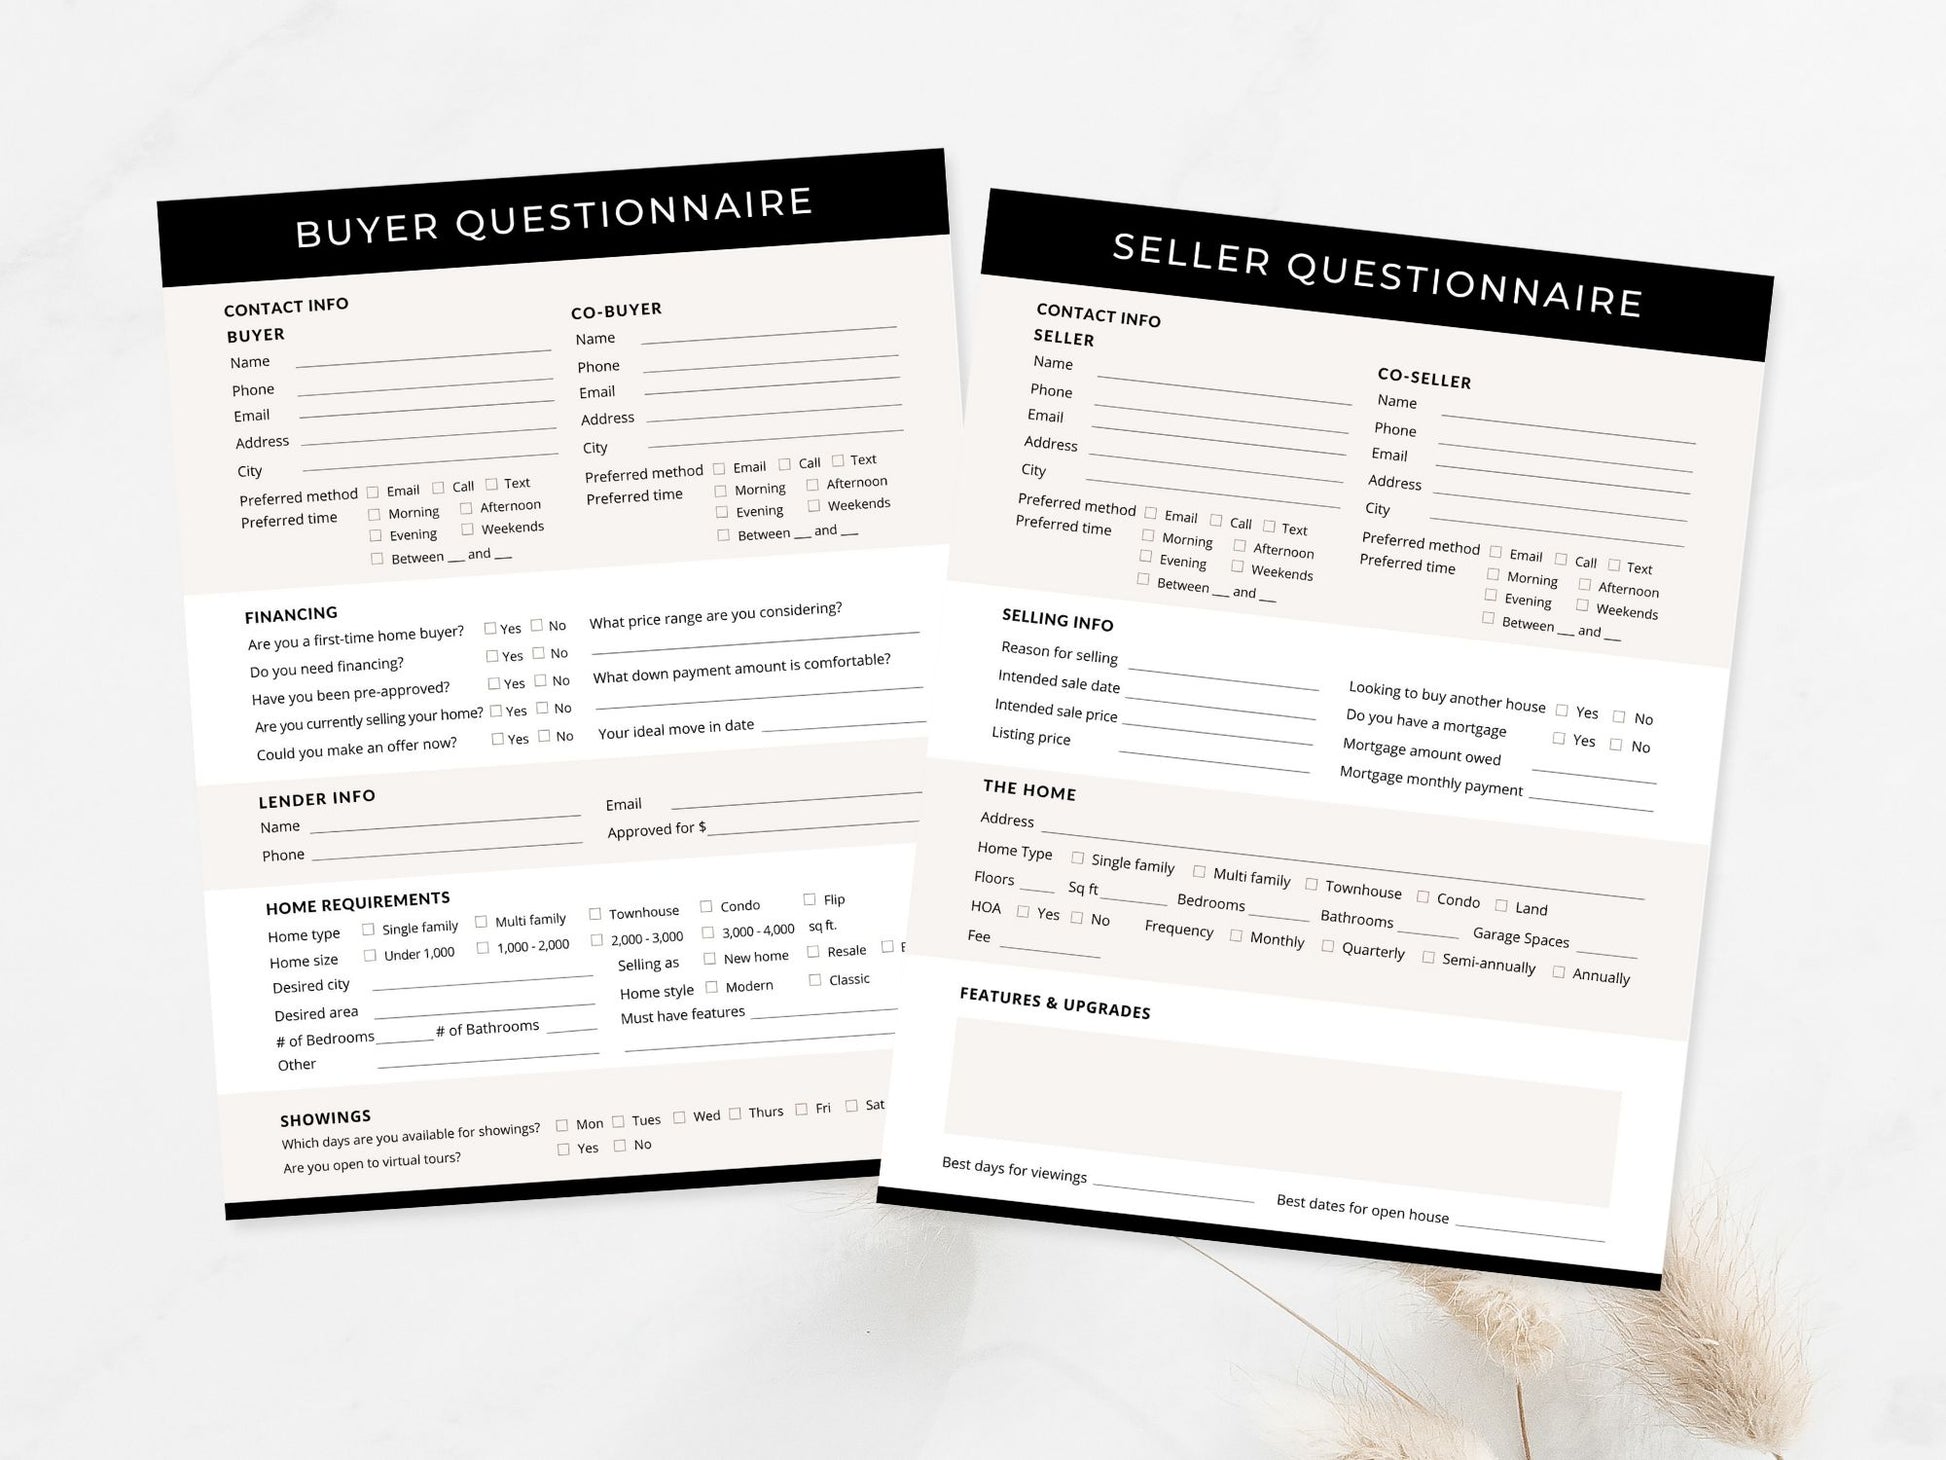 Luxury Black Buyer & Seller Questionnaire - High-end real estate template for elite property transactions.